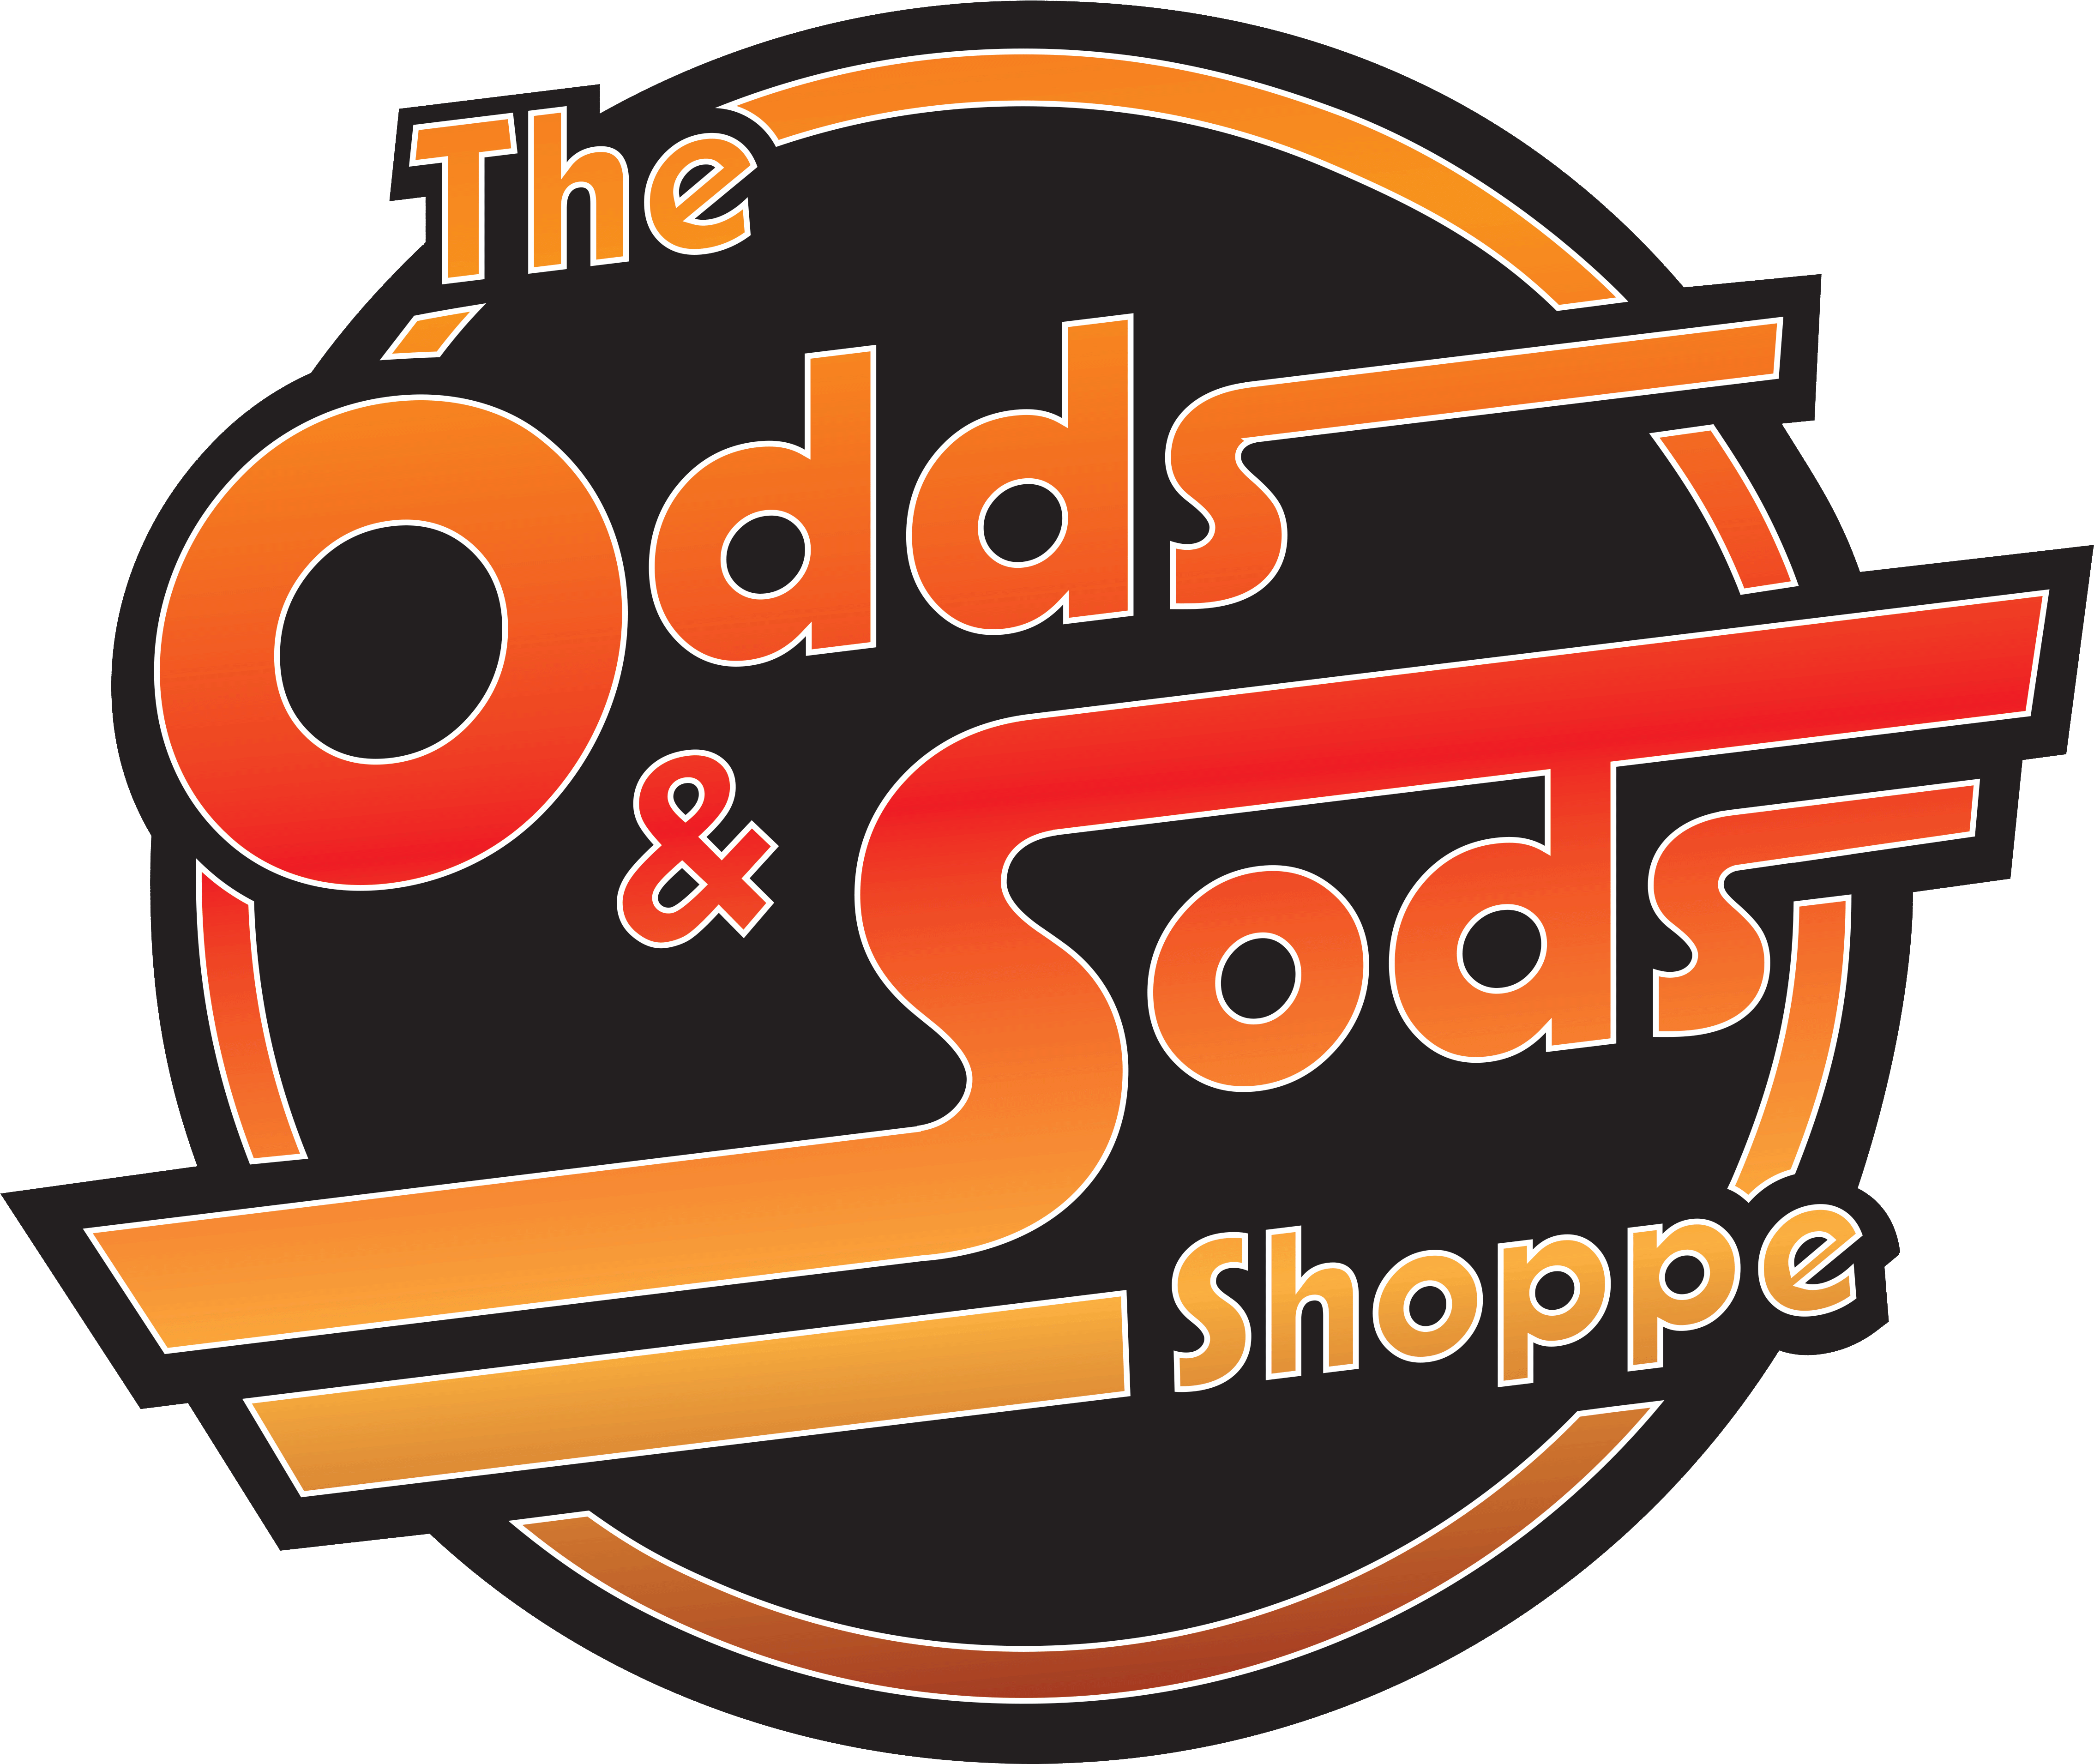 Record clipart soda shop. The odds sods shoppe